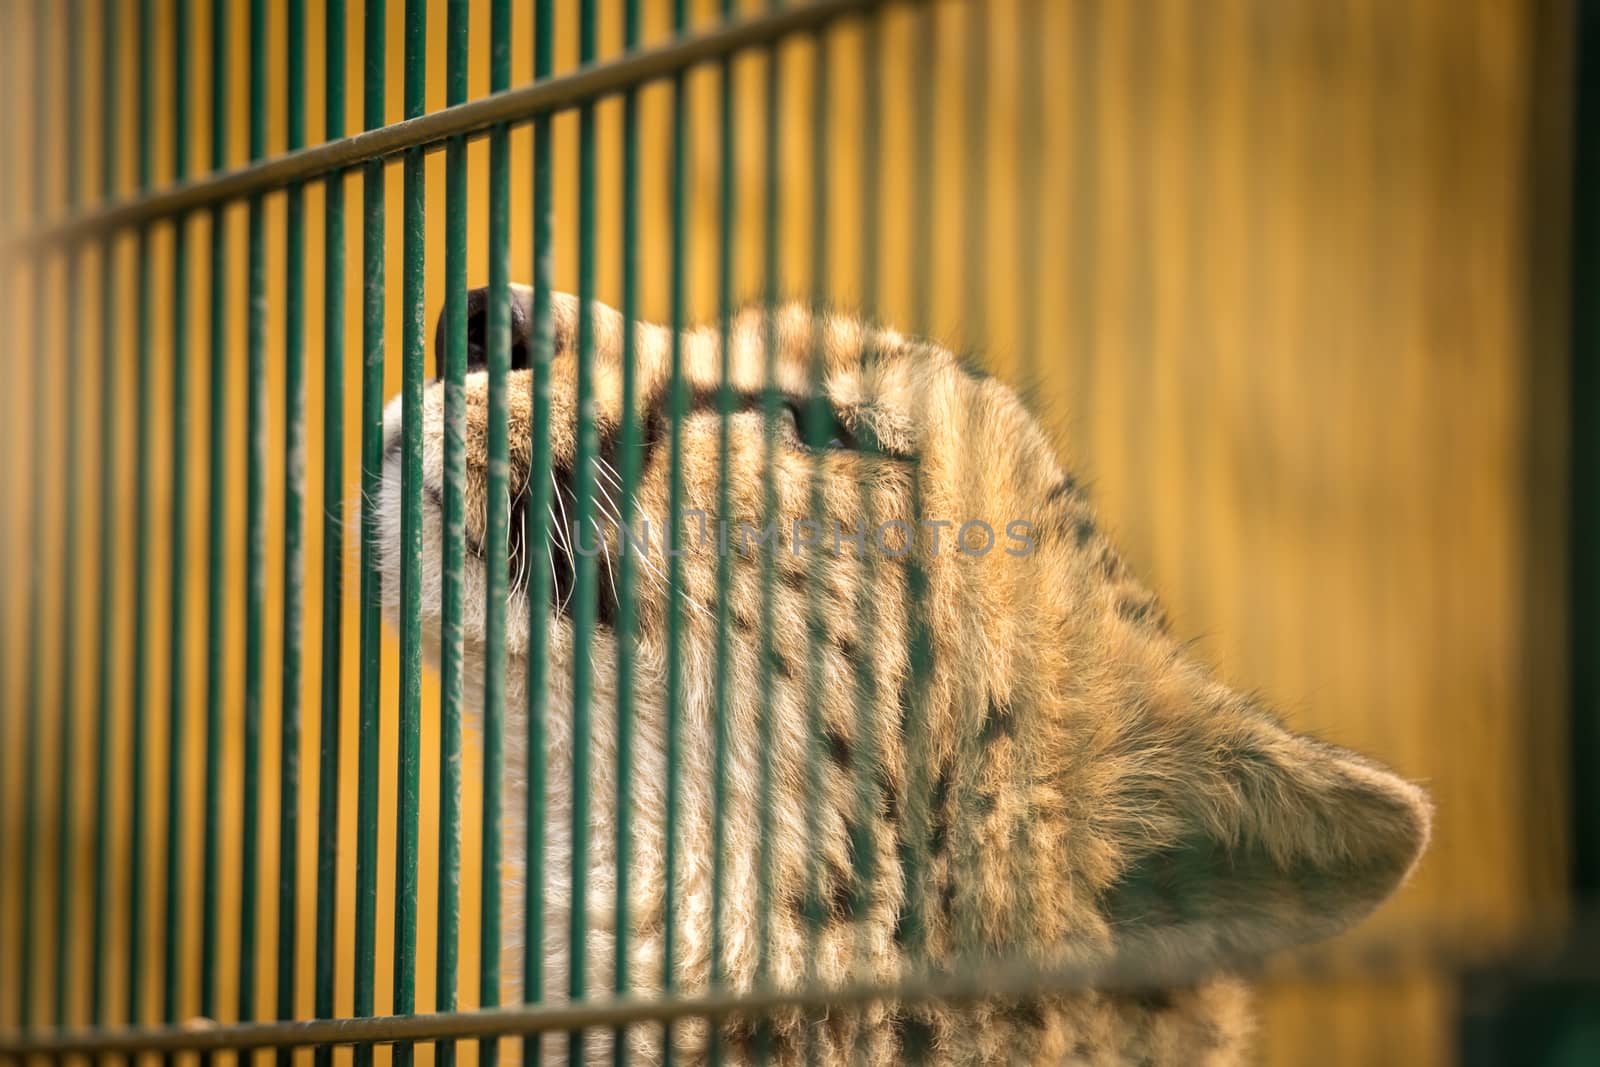 Sad cheetah closed behind the bars in a cage - zoo.